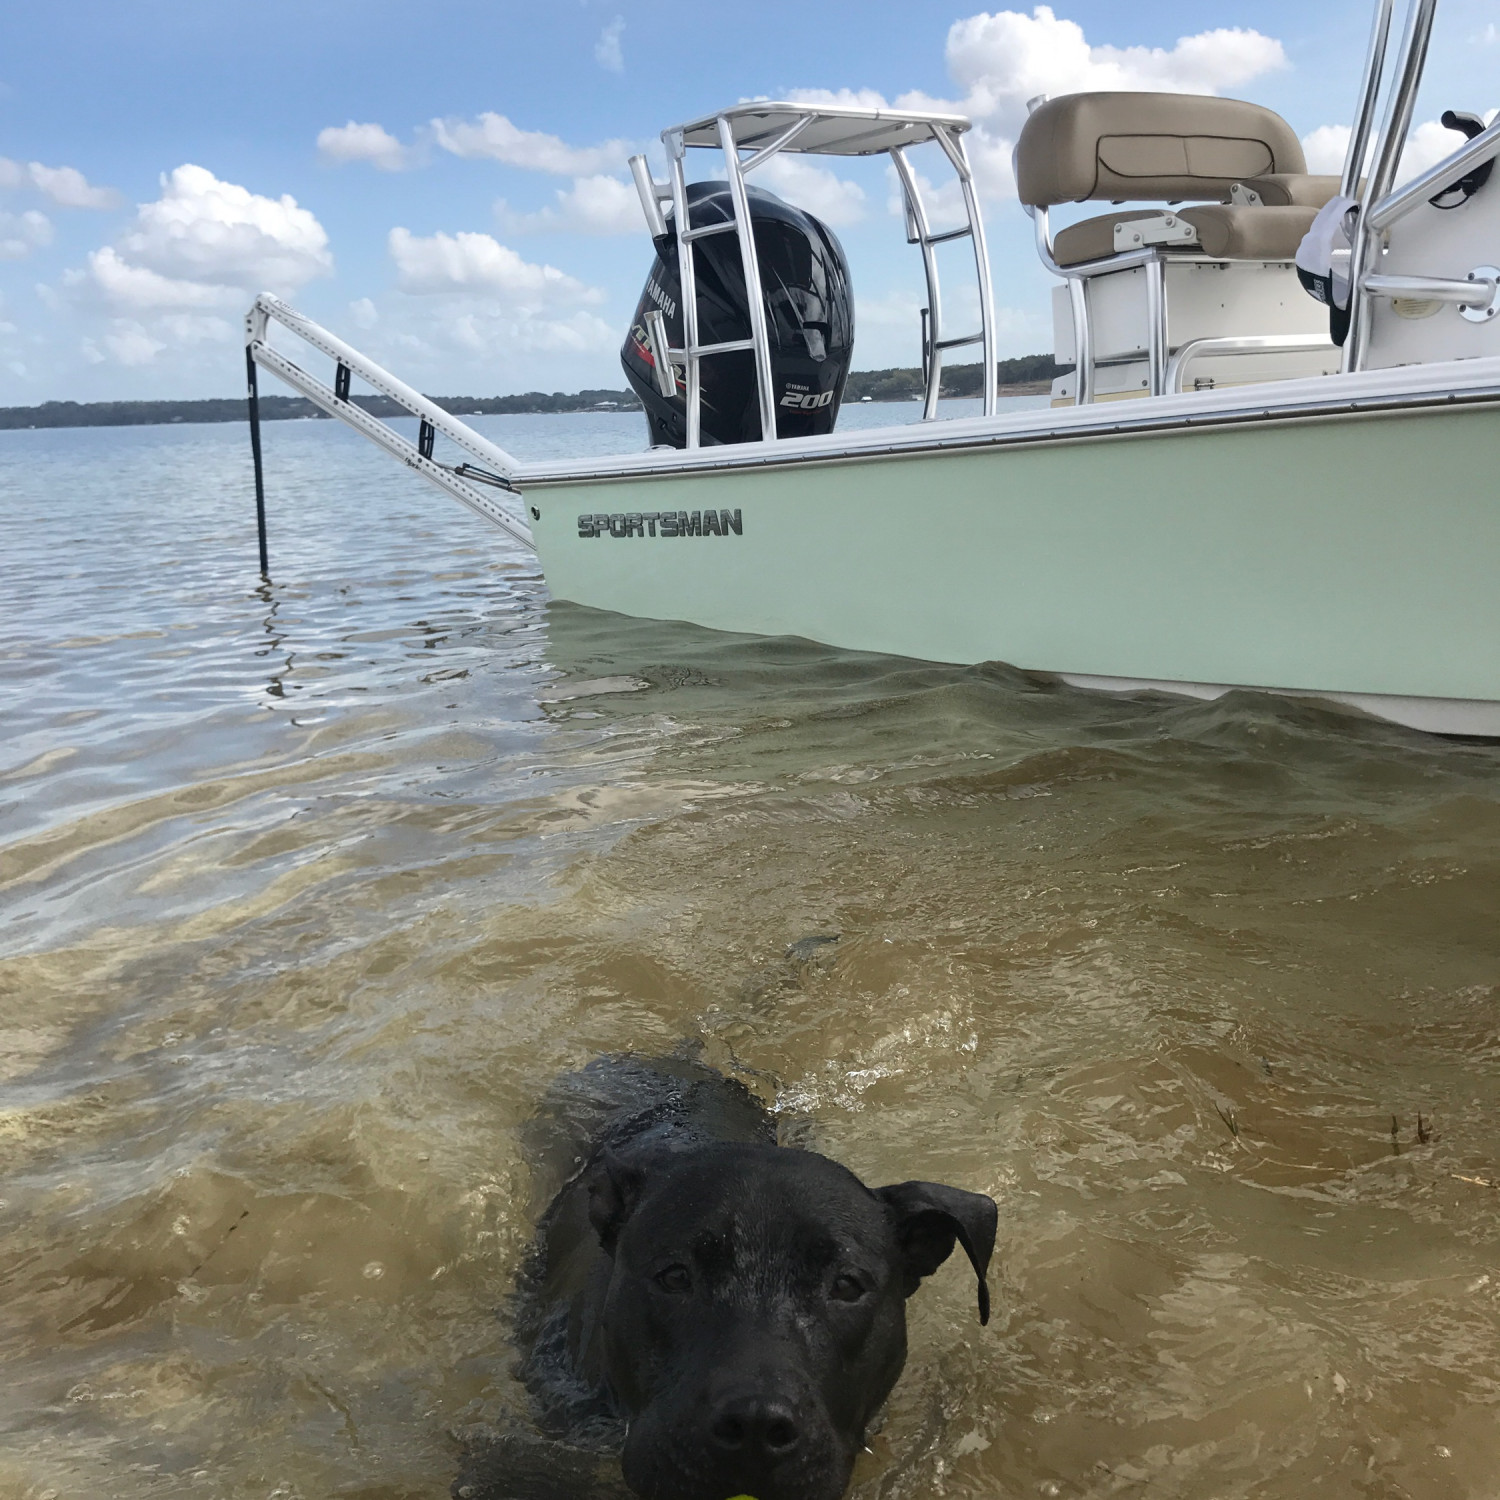 Title: A man’s two best friends! - On board their Sportsman Tournament 214 Bay Boat - Location: Ocklawaha, Florida. Participating in the Photo Contest #SportsmanApril2018